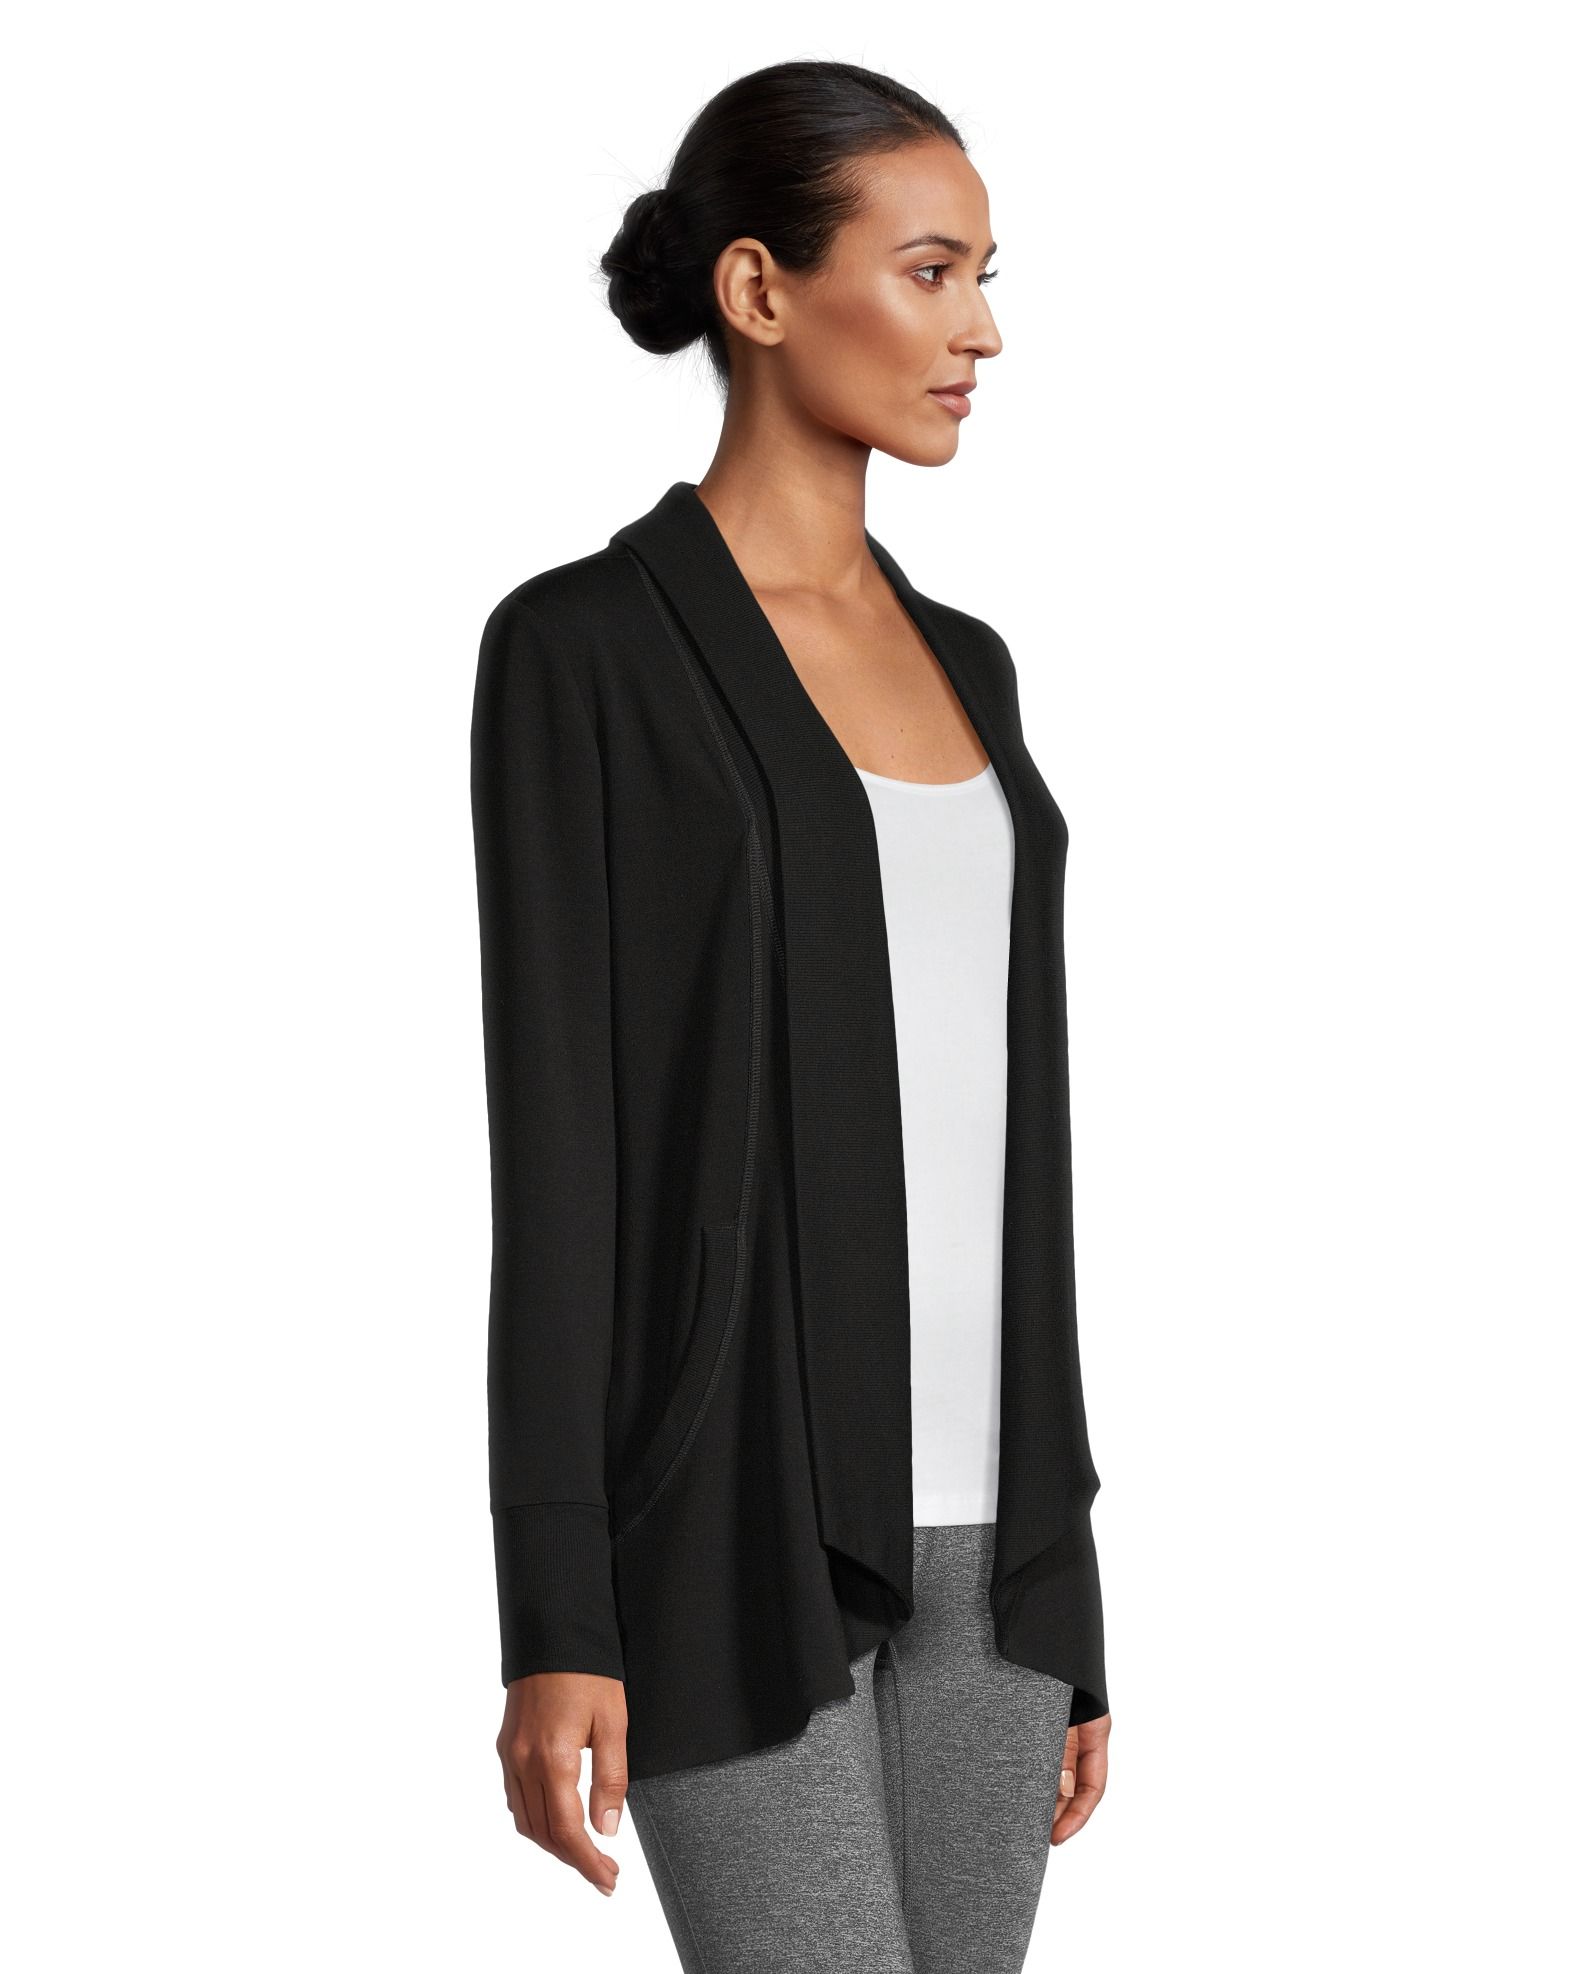 Denver Hayes Women's Luxe Supersoft Relaxed Fit Button Up Cardigan